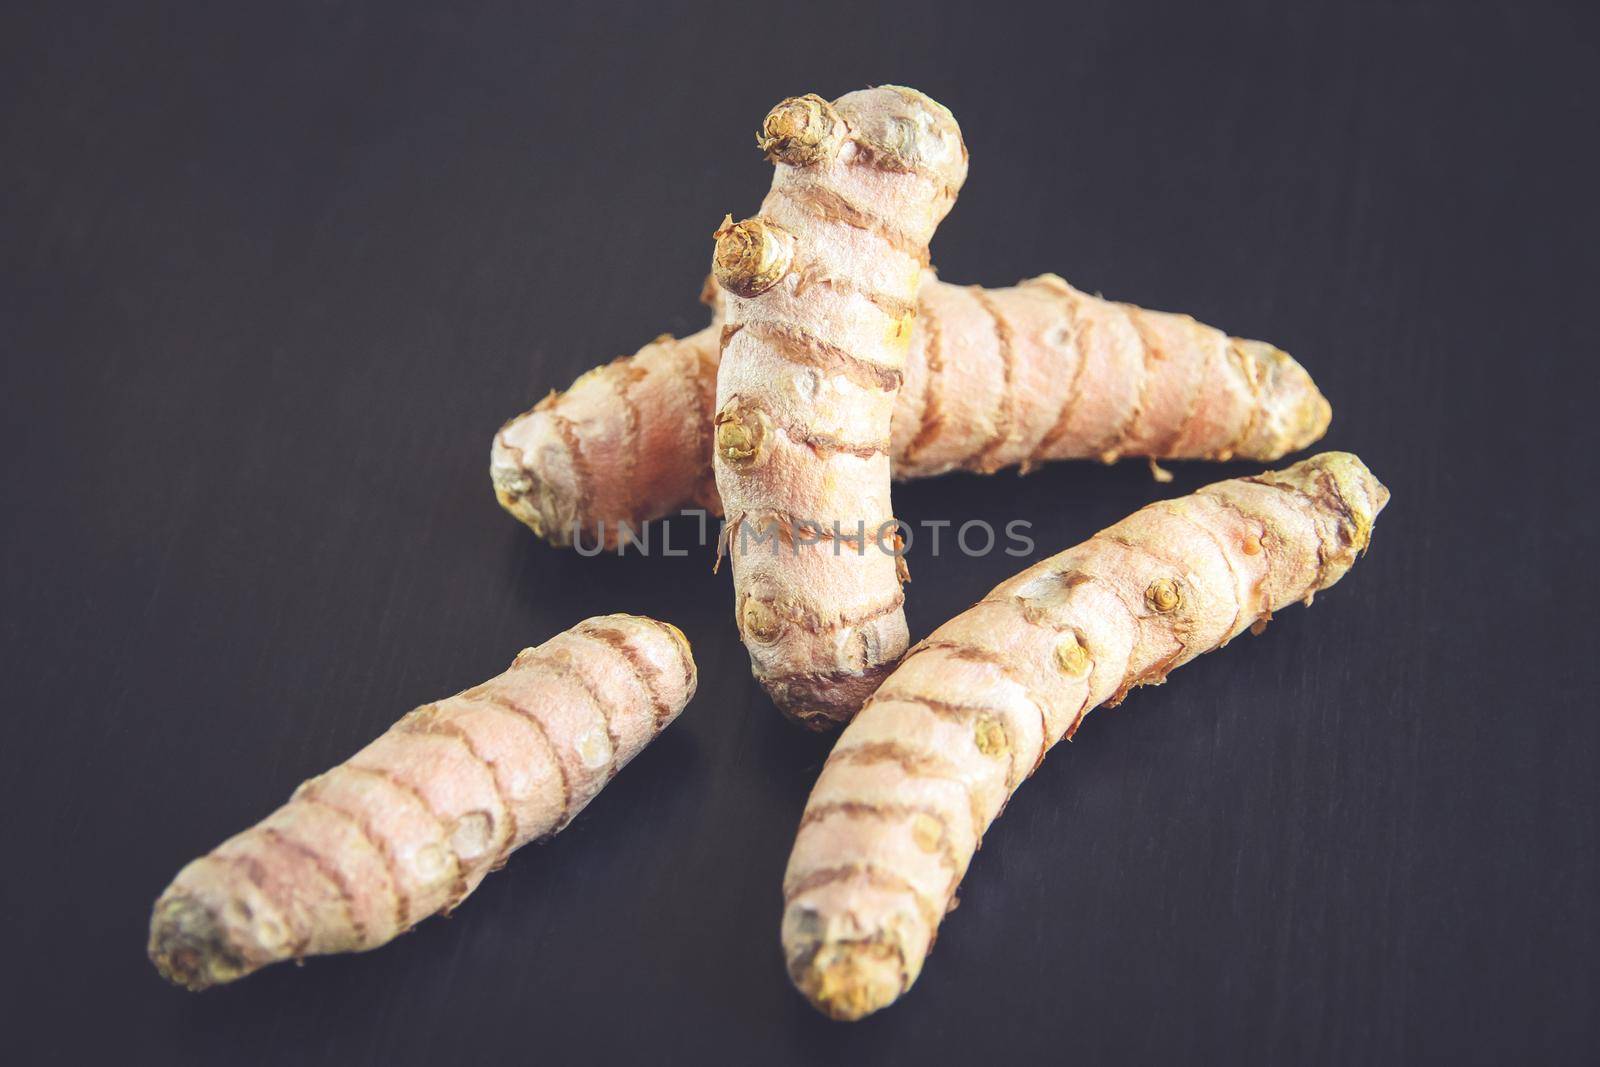 Turmeric root on a black wooden table. Close-up view